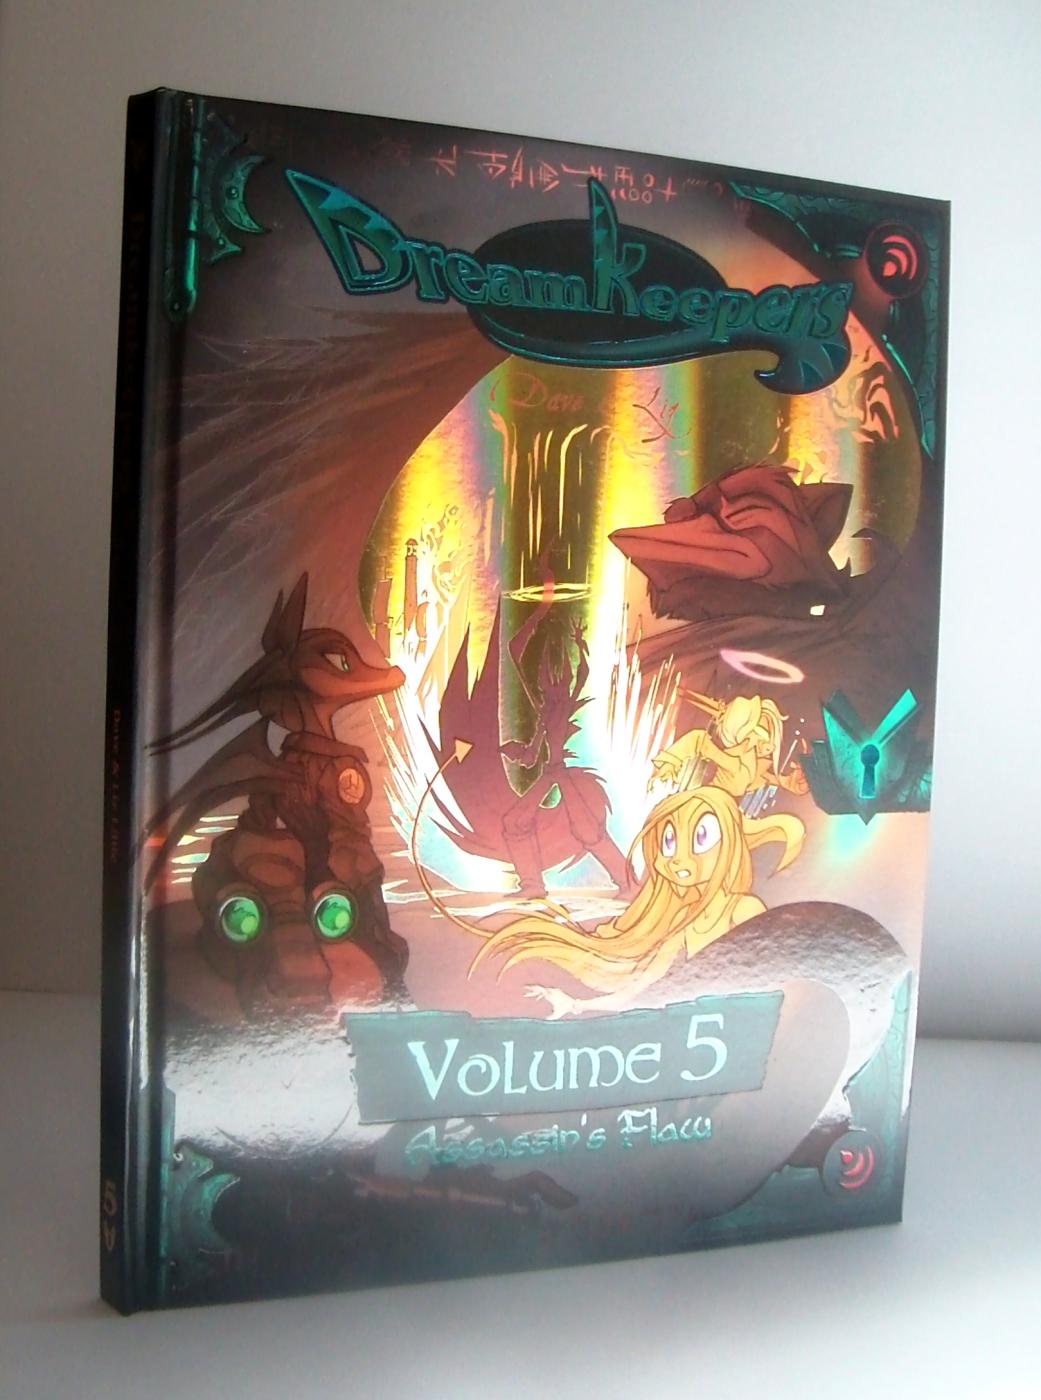 1st-edition Dreamkeepers Volume 5